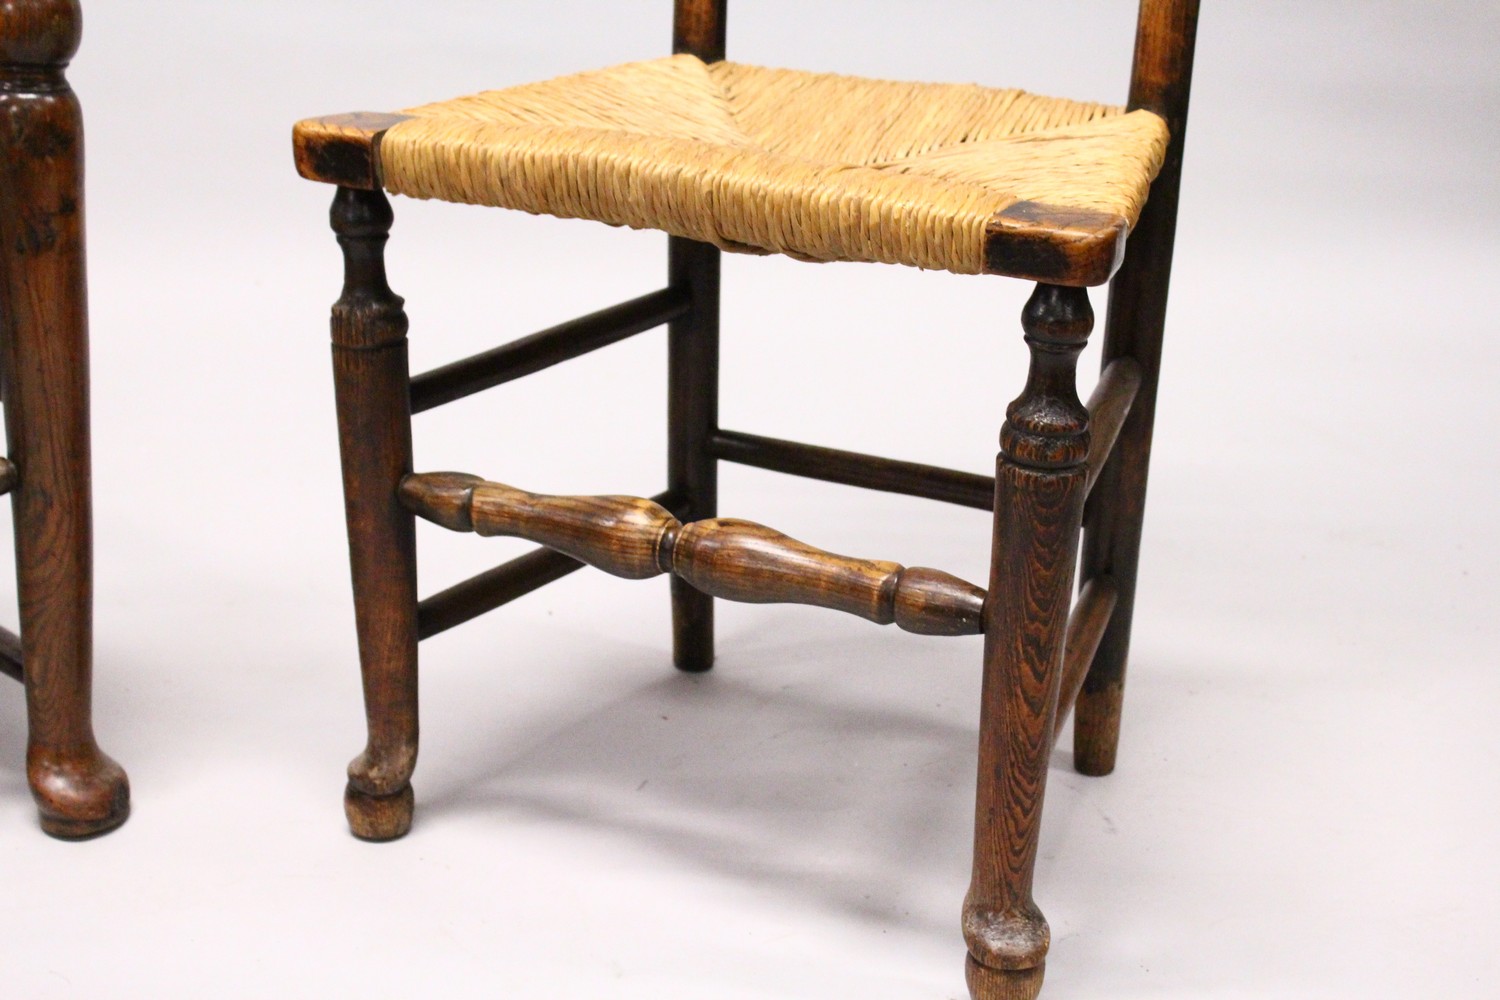 A MATCHED SET OF SIX 19TH CENTURY ASH AND ELM LADDER BACK DINING CHAIRS, two with arms, with rush - Image 2 of 8